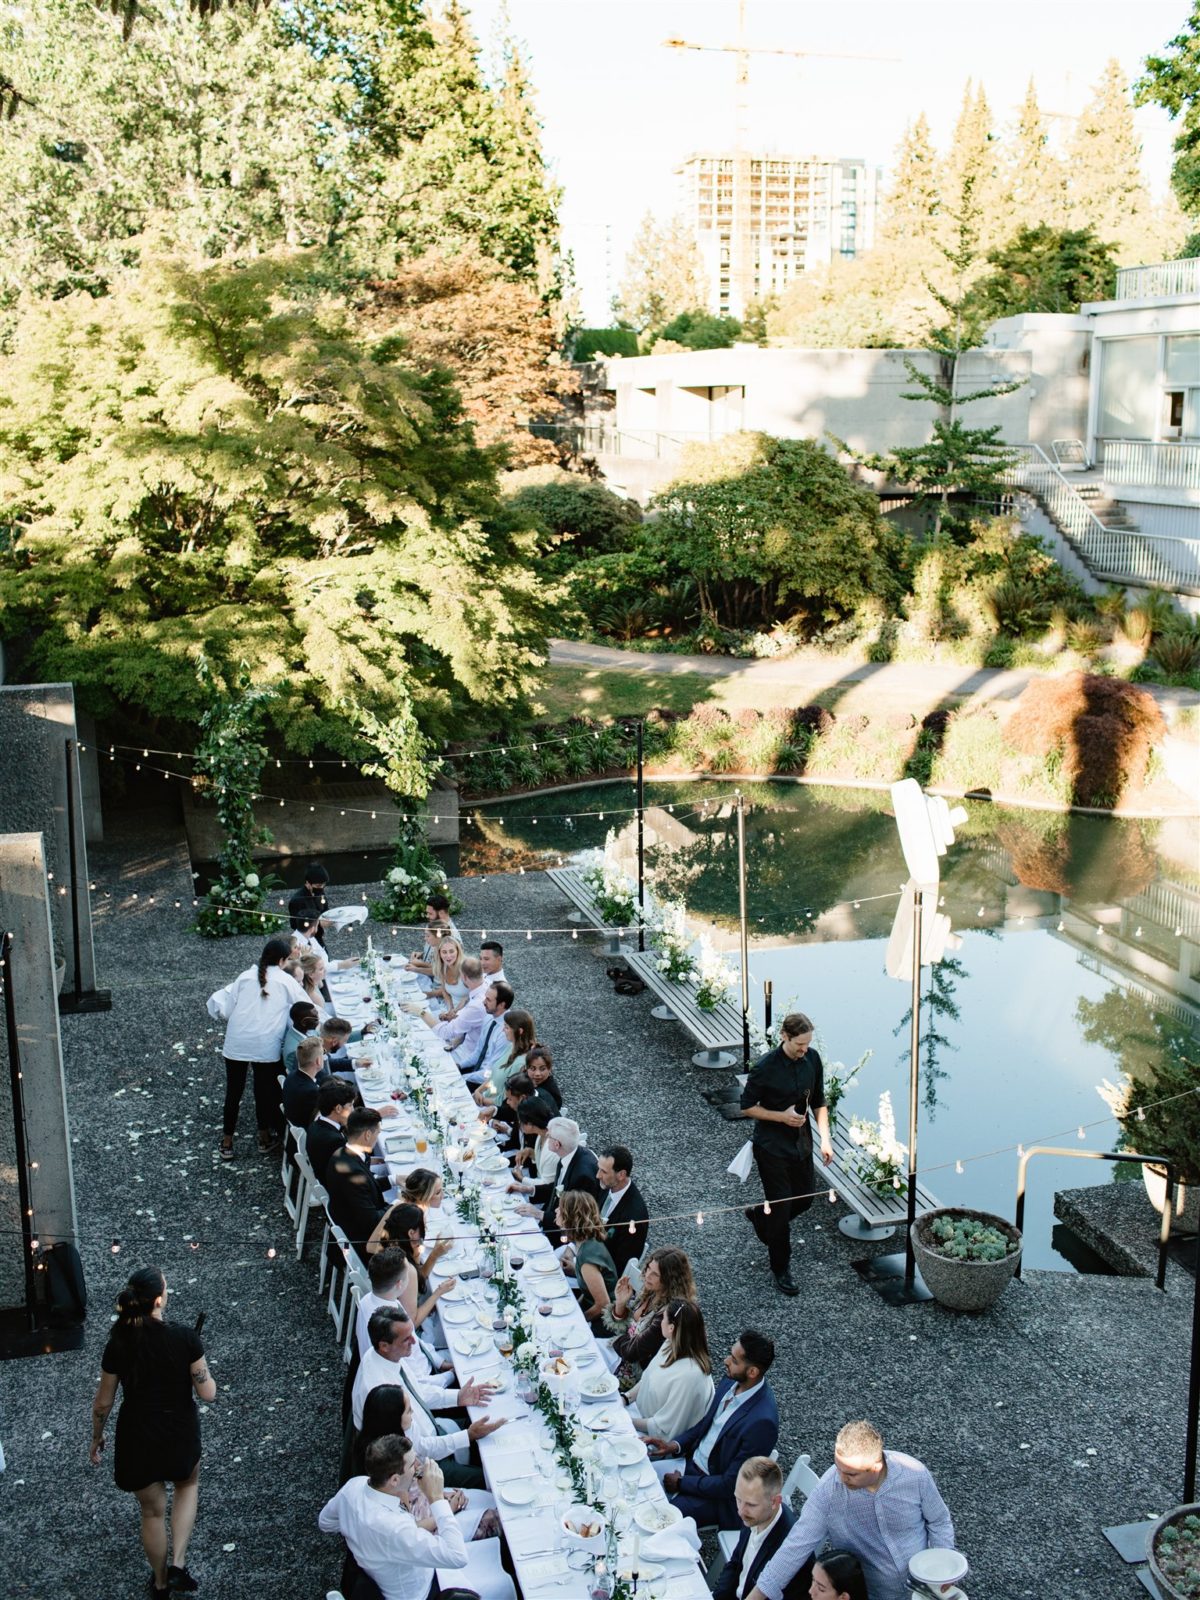 outdoor wedding reception, outdoor ceremony inspiration, outdoor dinner, green black and white wedding colour palette, alfresco dining